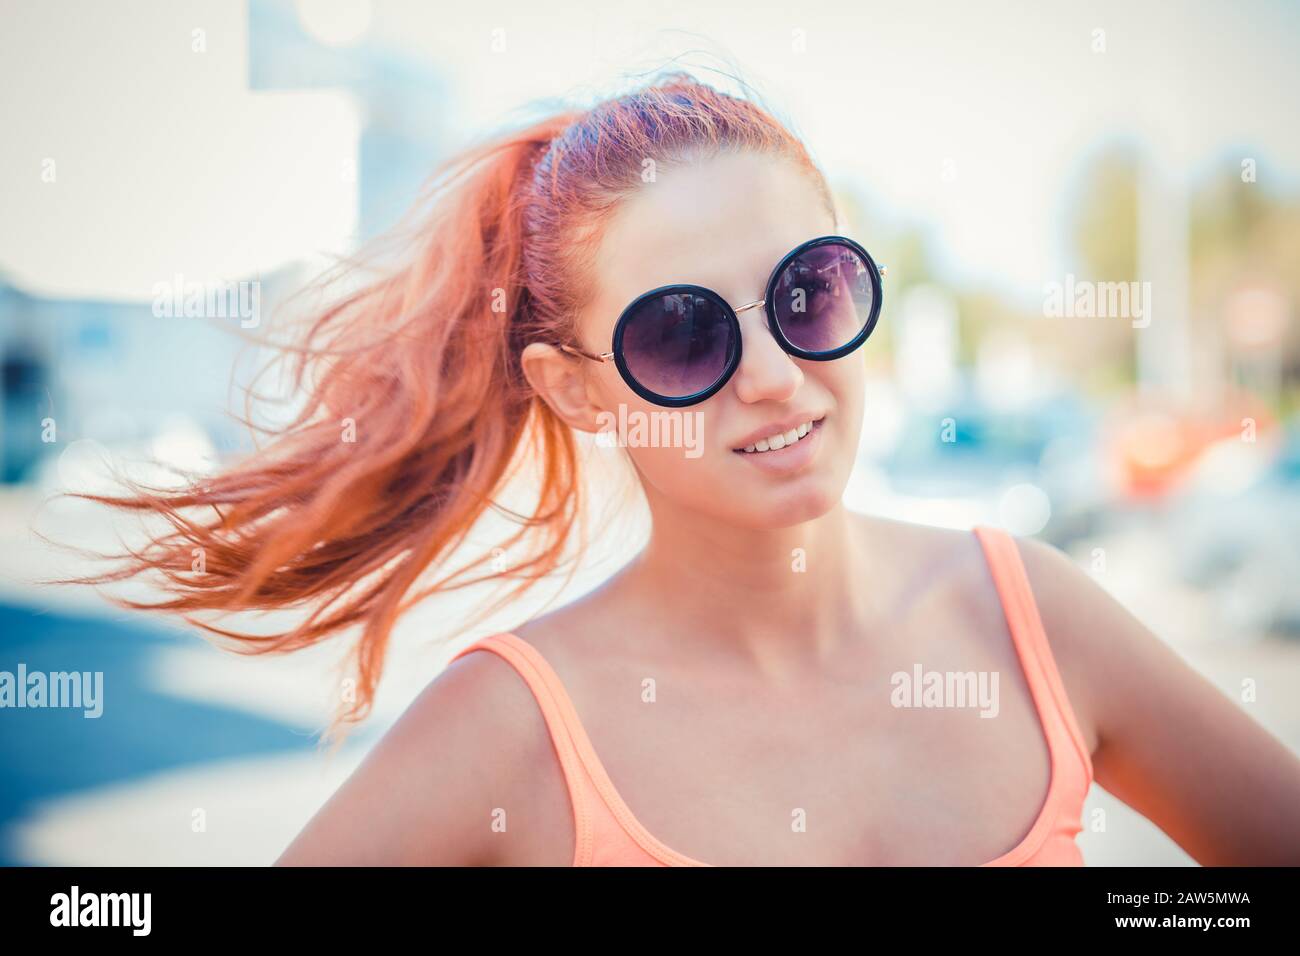 Smiling beautiful young woman in pink shirt and round sunglasses enjoying time outdoors in summer holiday time. beauty outdoor portrait with city stre Stock Photo